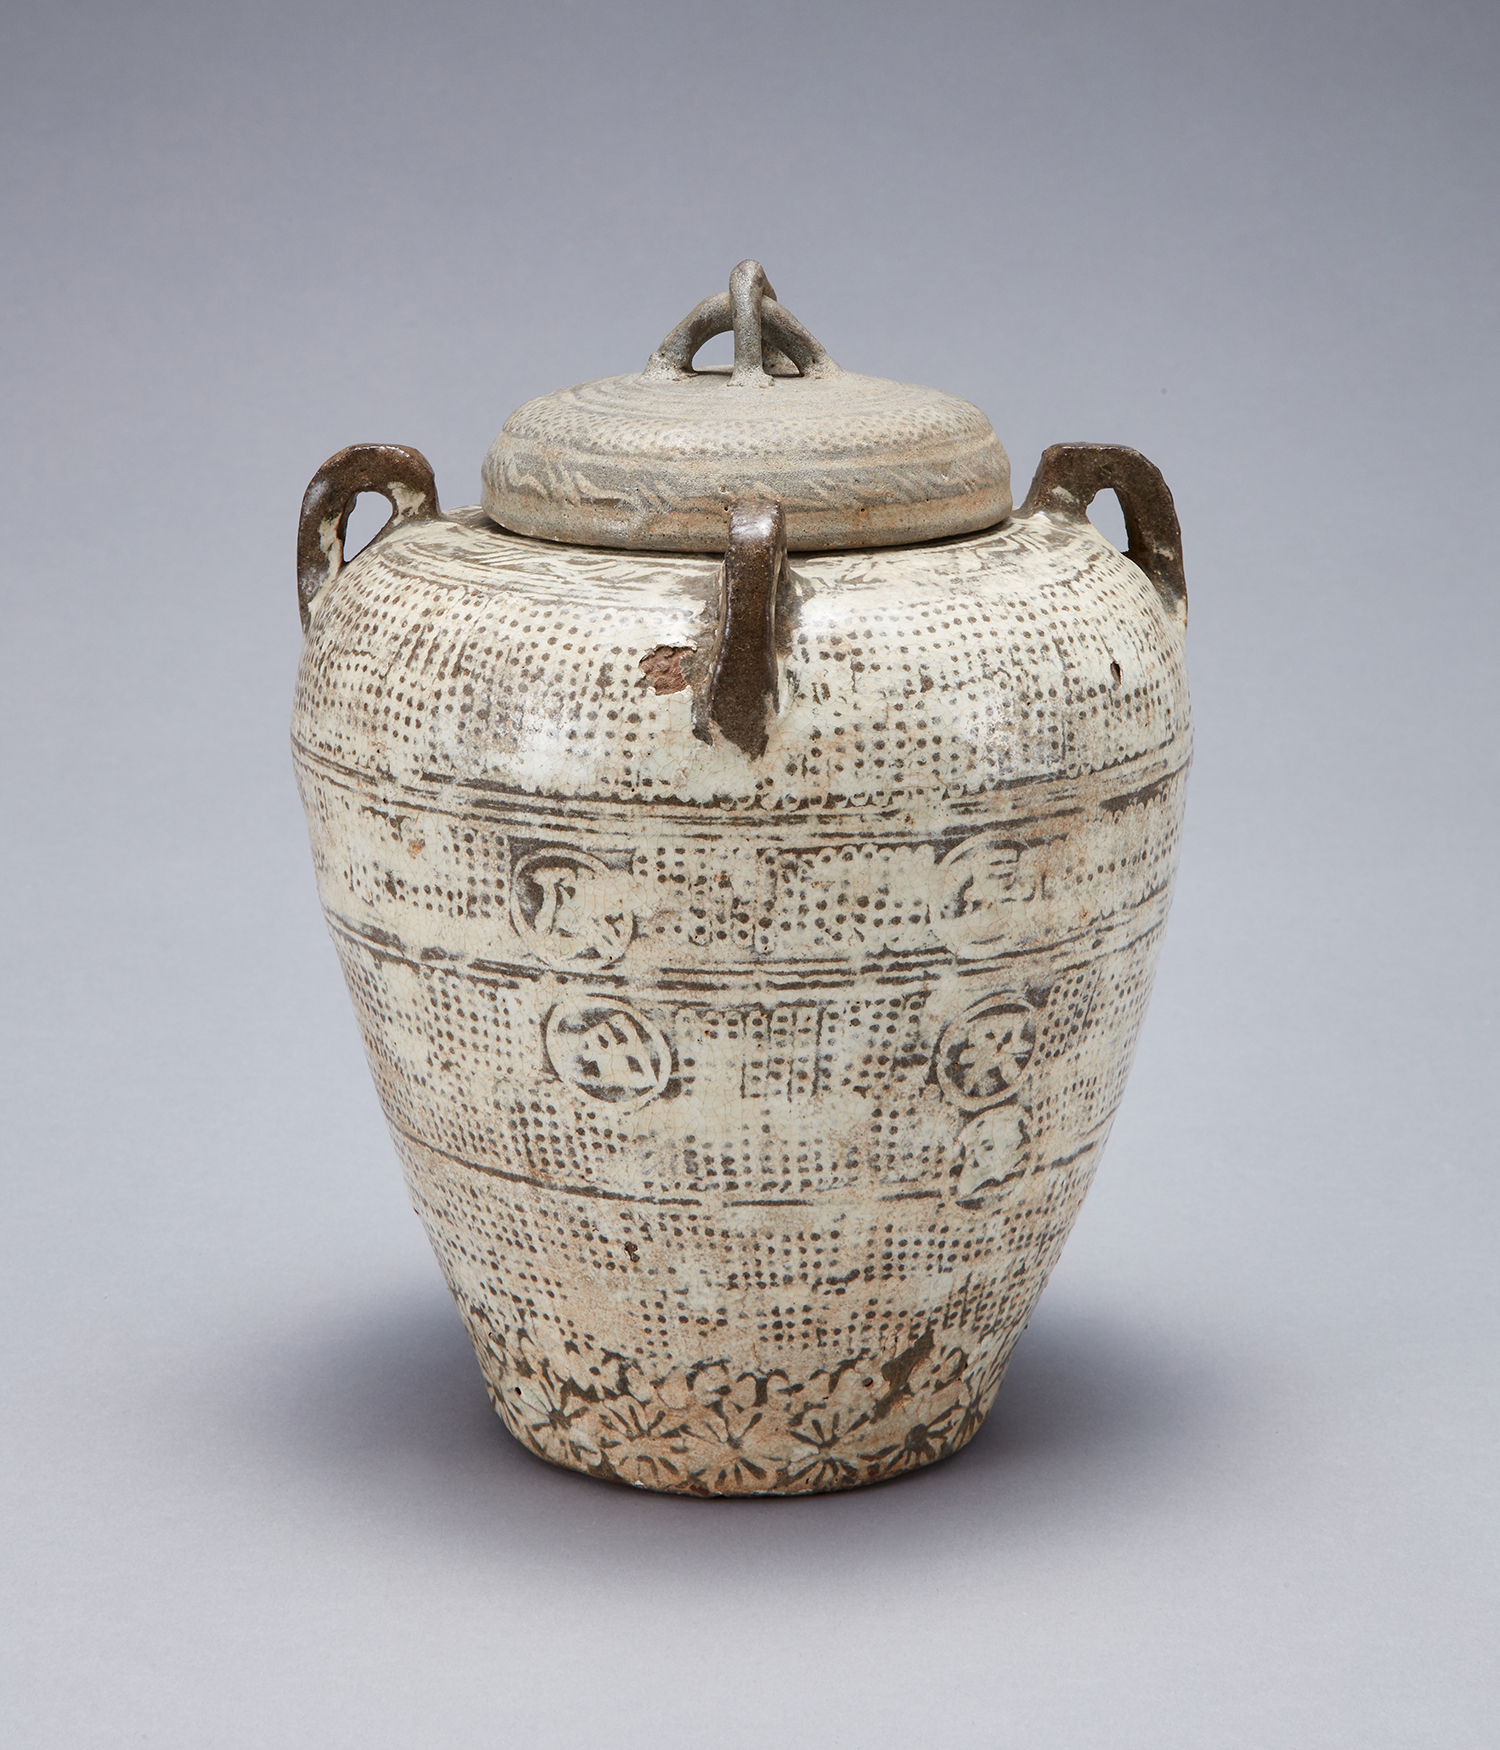 Placenta Jar and Cover with Stamped Design and the Inscription of “Gyeongju-jangheunggo”